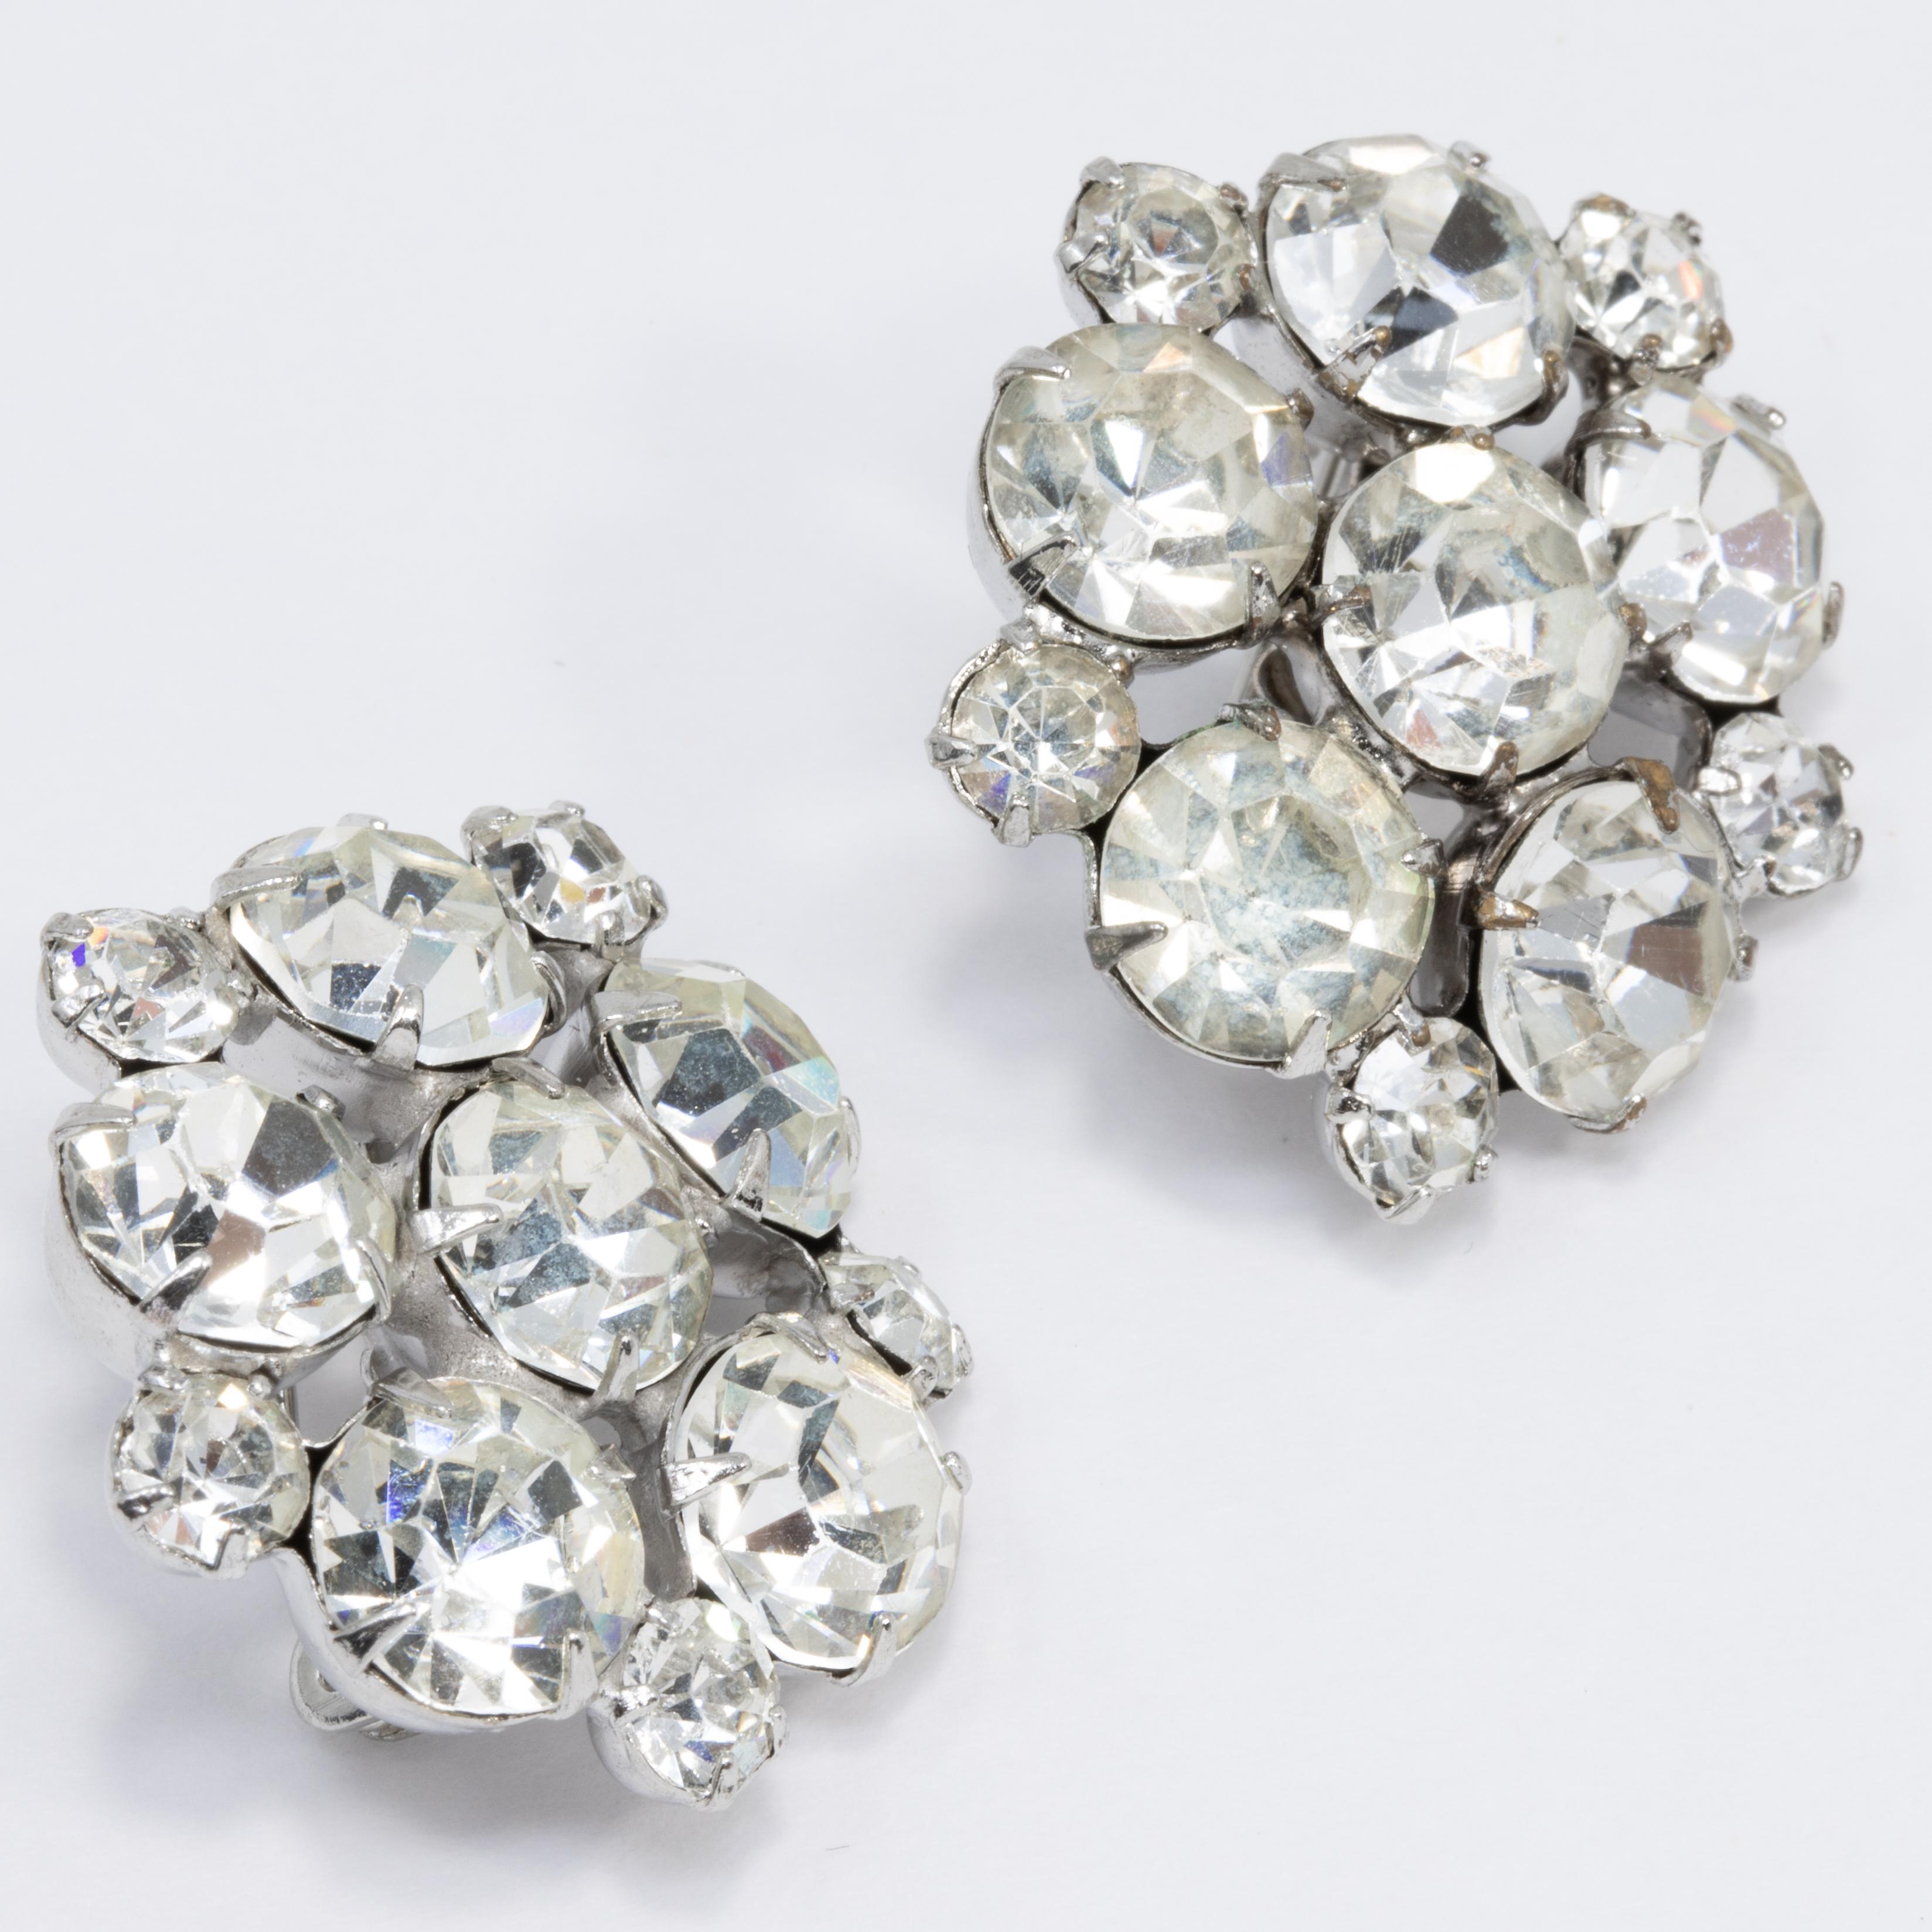 A twin pair of vintage, clear crystal brooches. Prong-set in a silvertone setting. Glamorous!


Each 1 in / 2.6 cm
